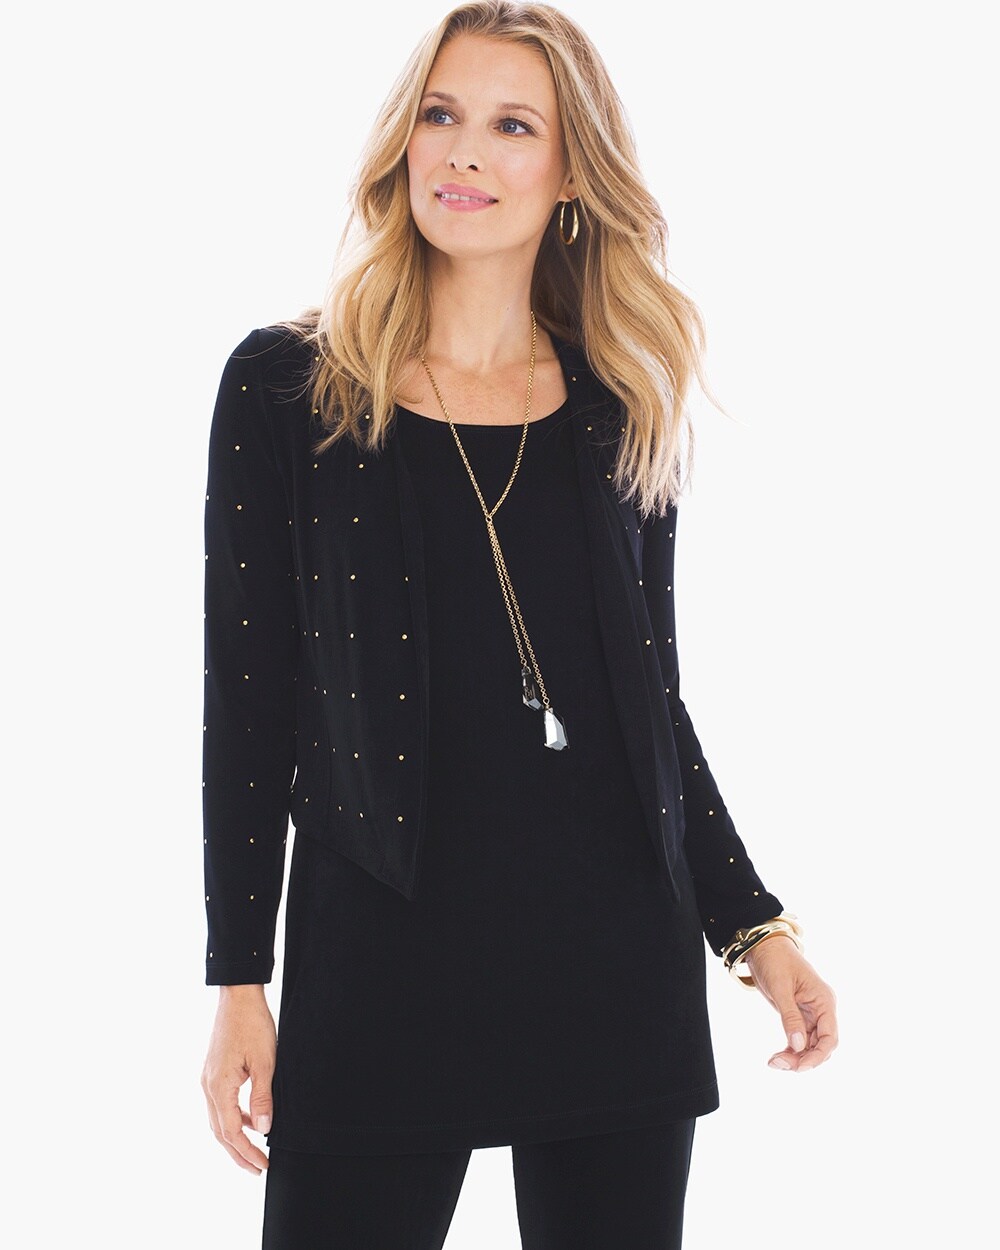 Travelers Classic Allover Studded Jacket